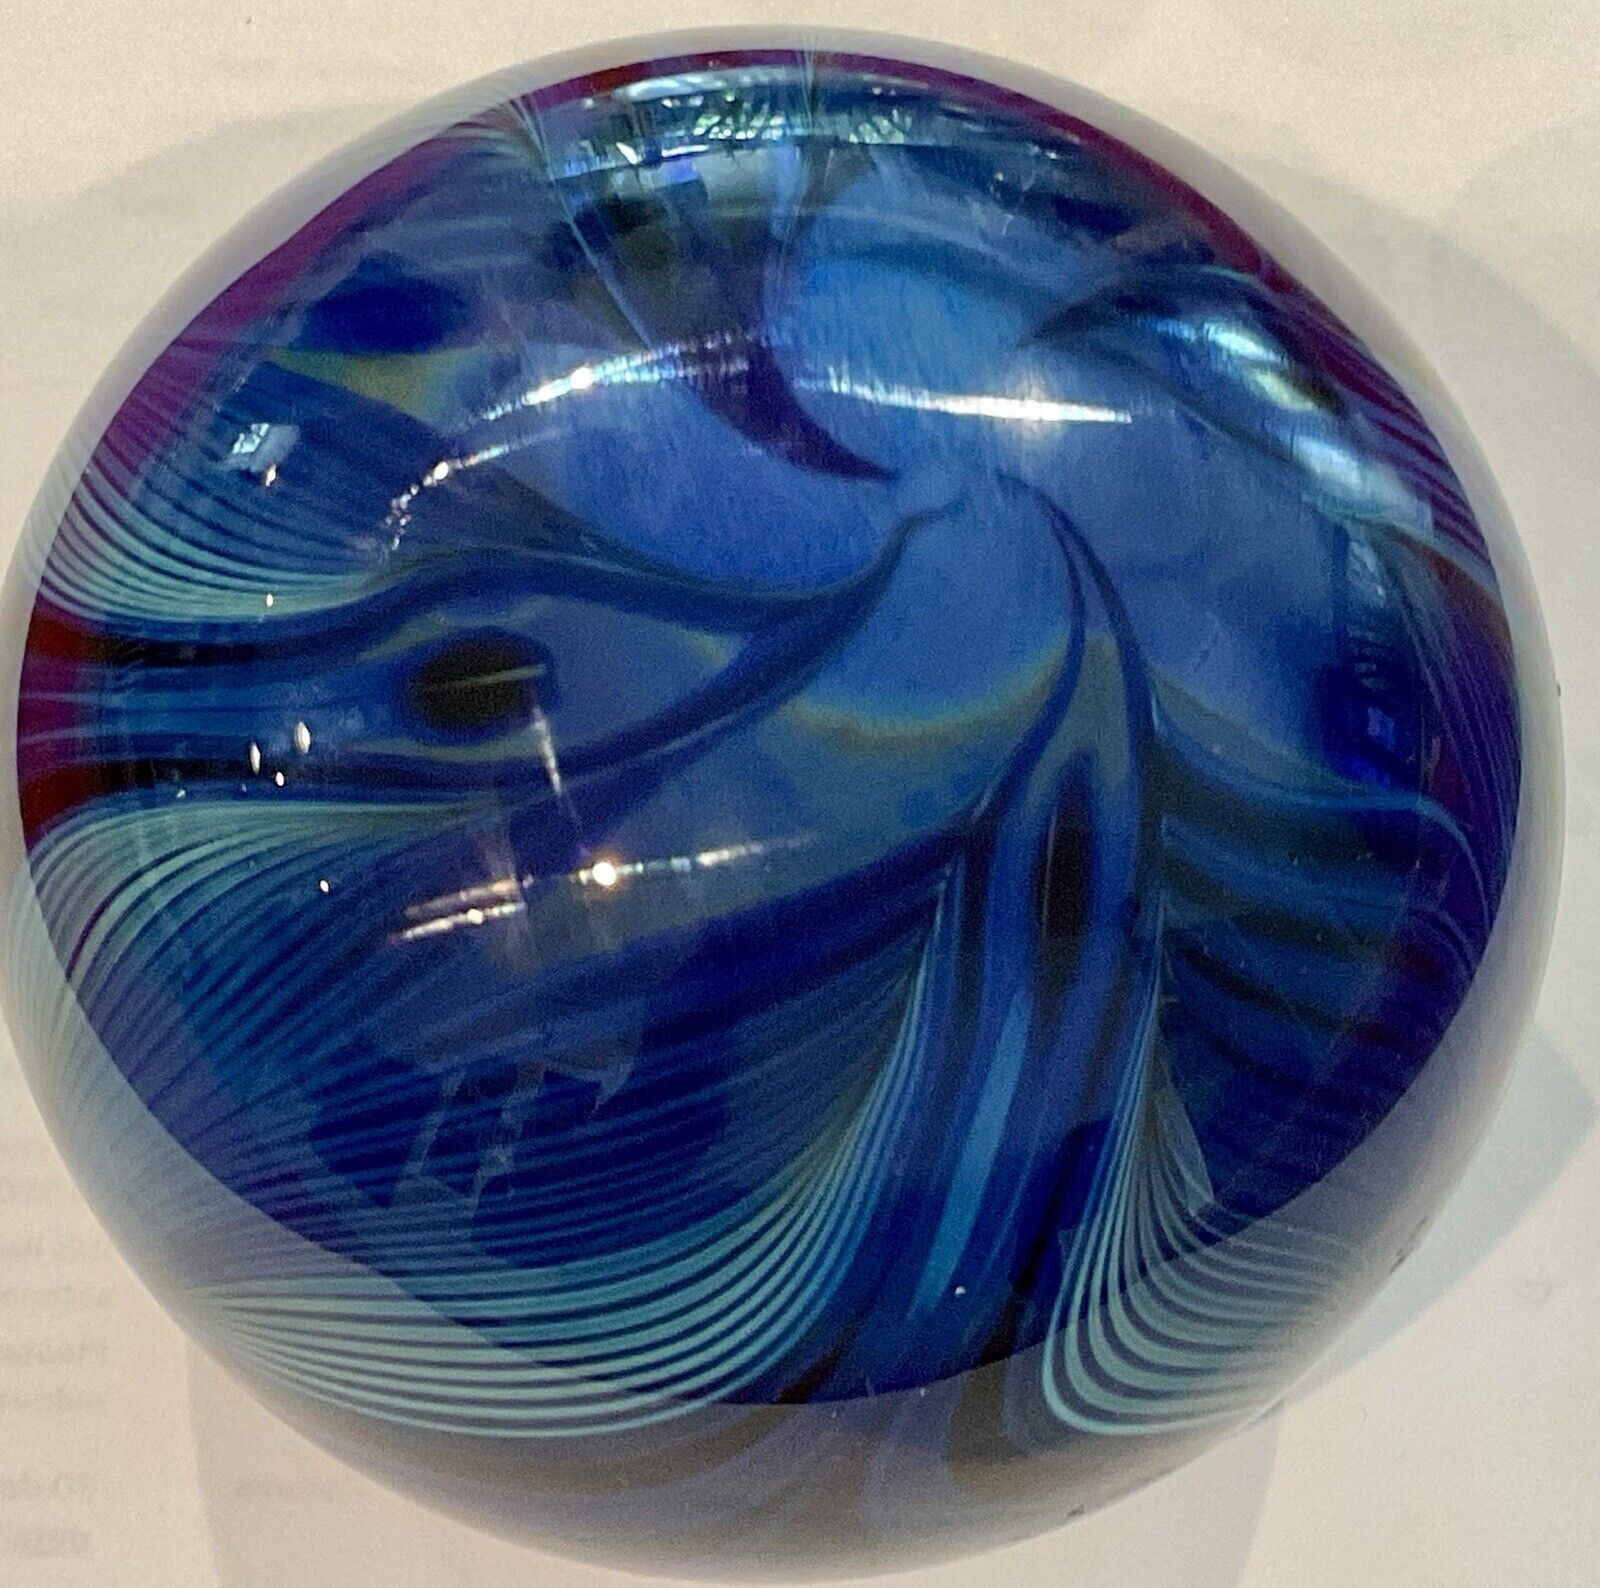 1978 RANDY STRONG ART GLASS VEINED ABSTRACT BLUES PAPER WEIGHT GORGEOUS